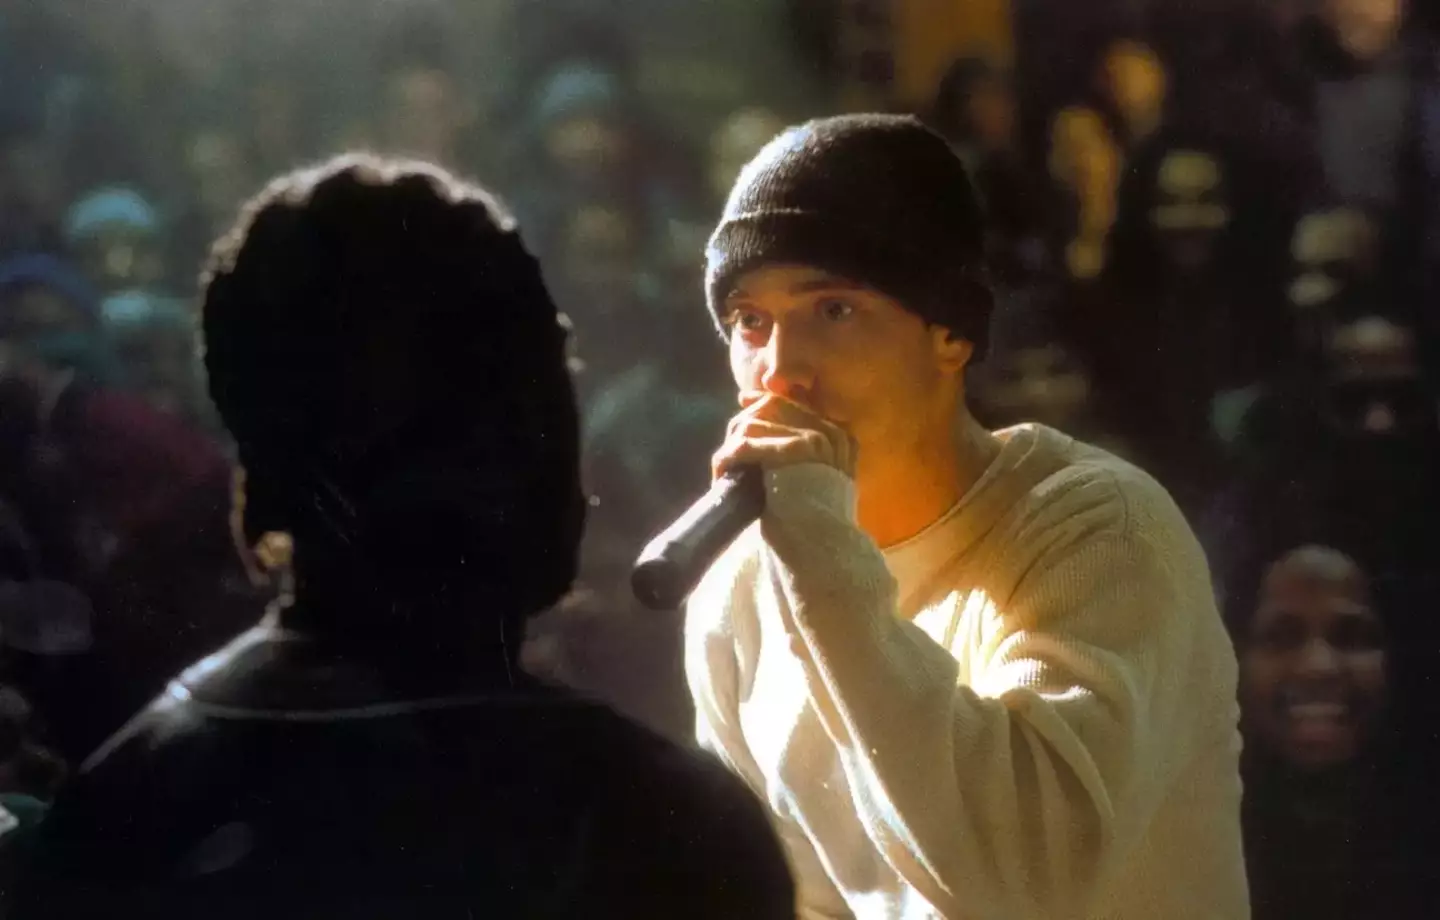 Fans of 8 Mile have been keen to see a sequel.